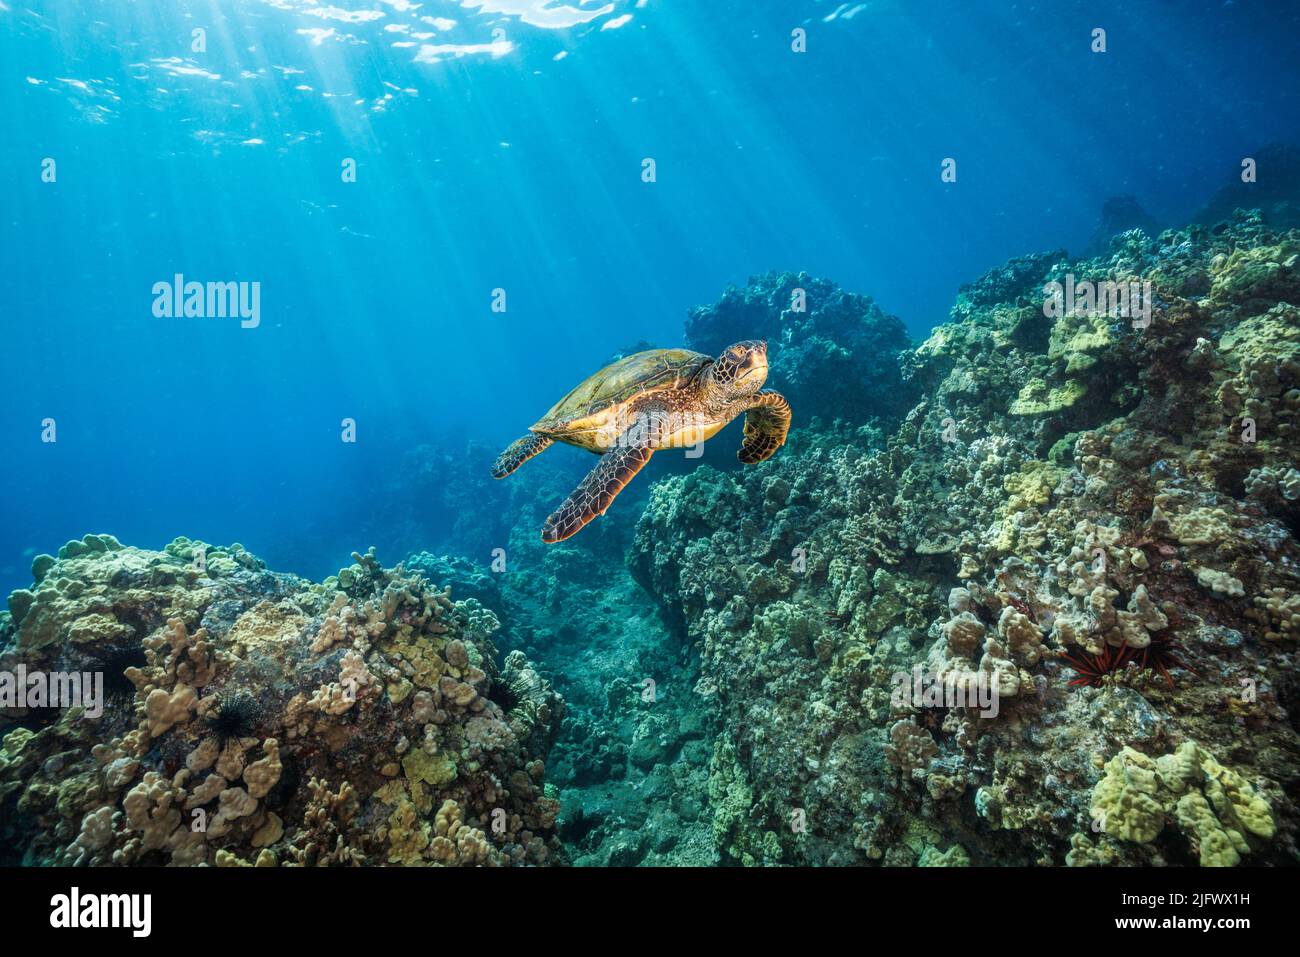 A green sea turtle, Chelonia mydas, an endangered species, glides over a reef off the island of Maui, Hawaii. Stock Photo